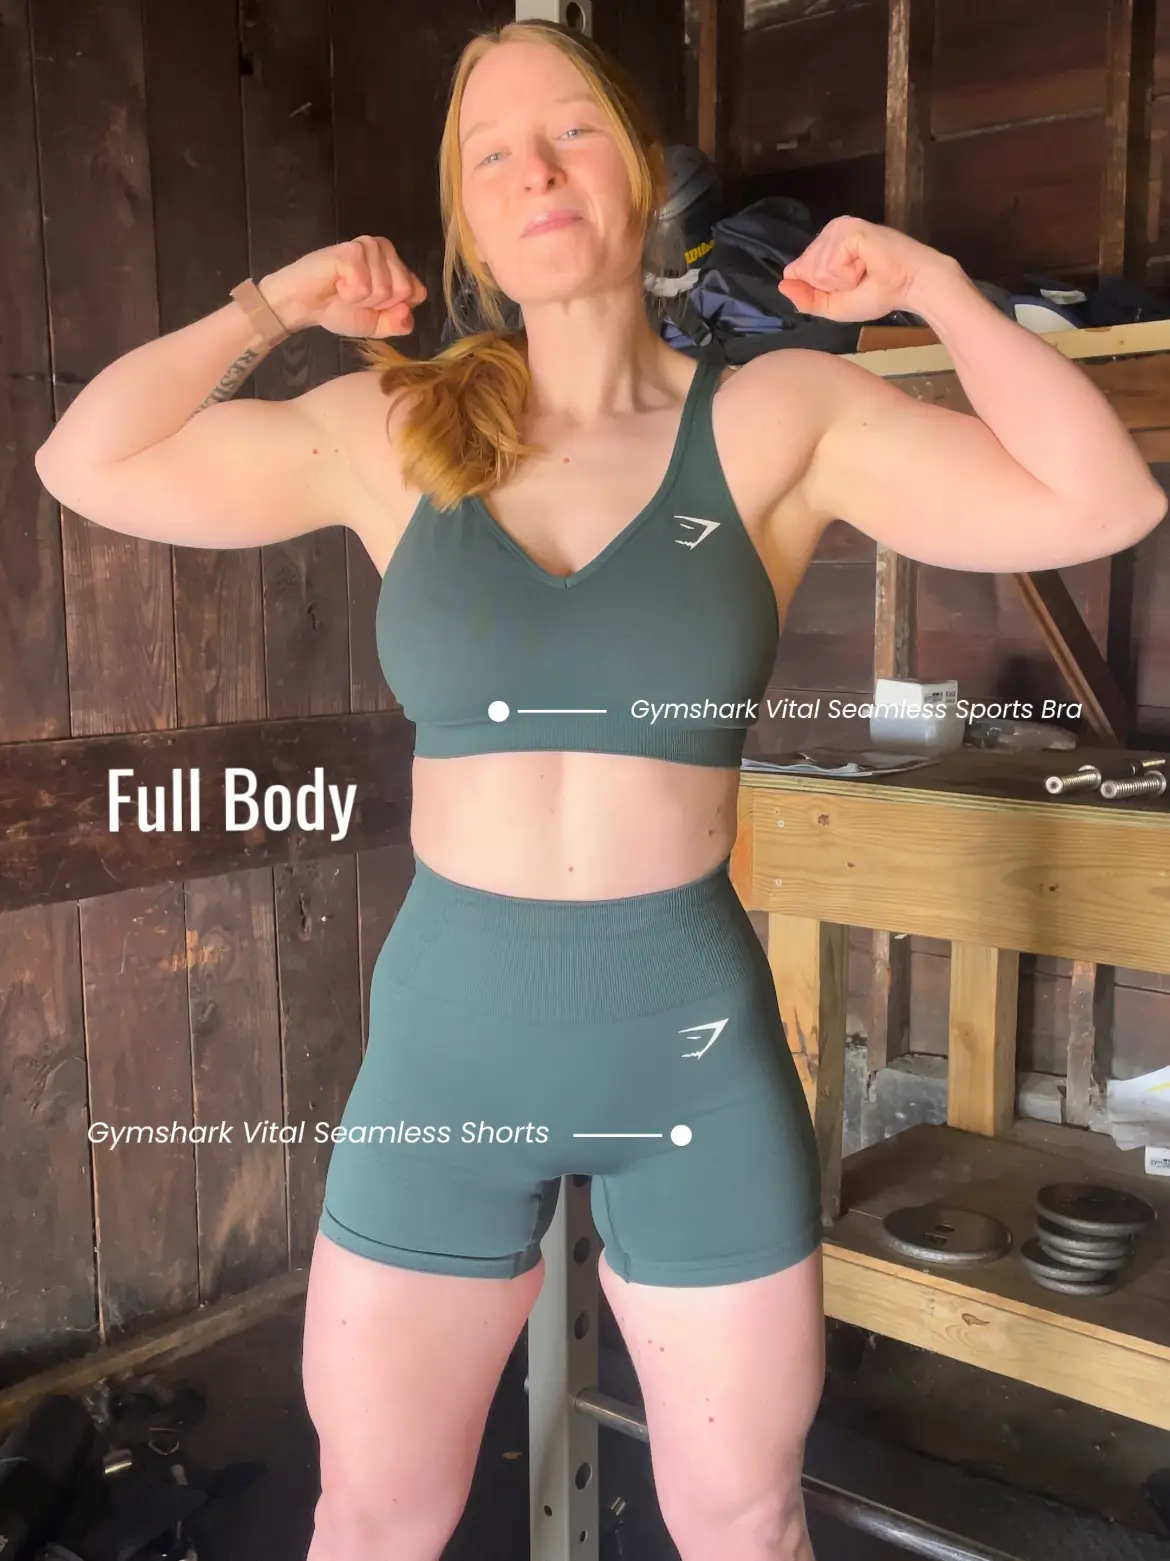 Week of Gymshark Fits, Gallery posted by LauraLeeFitness